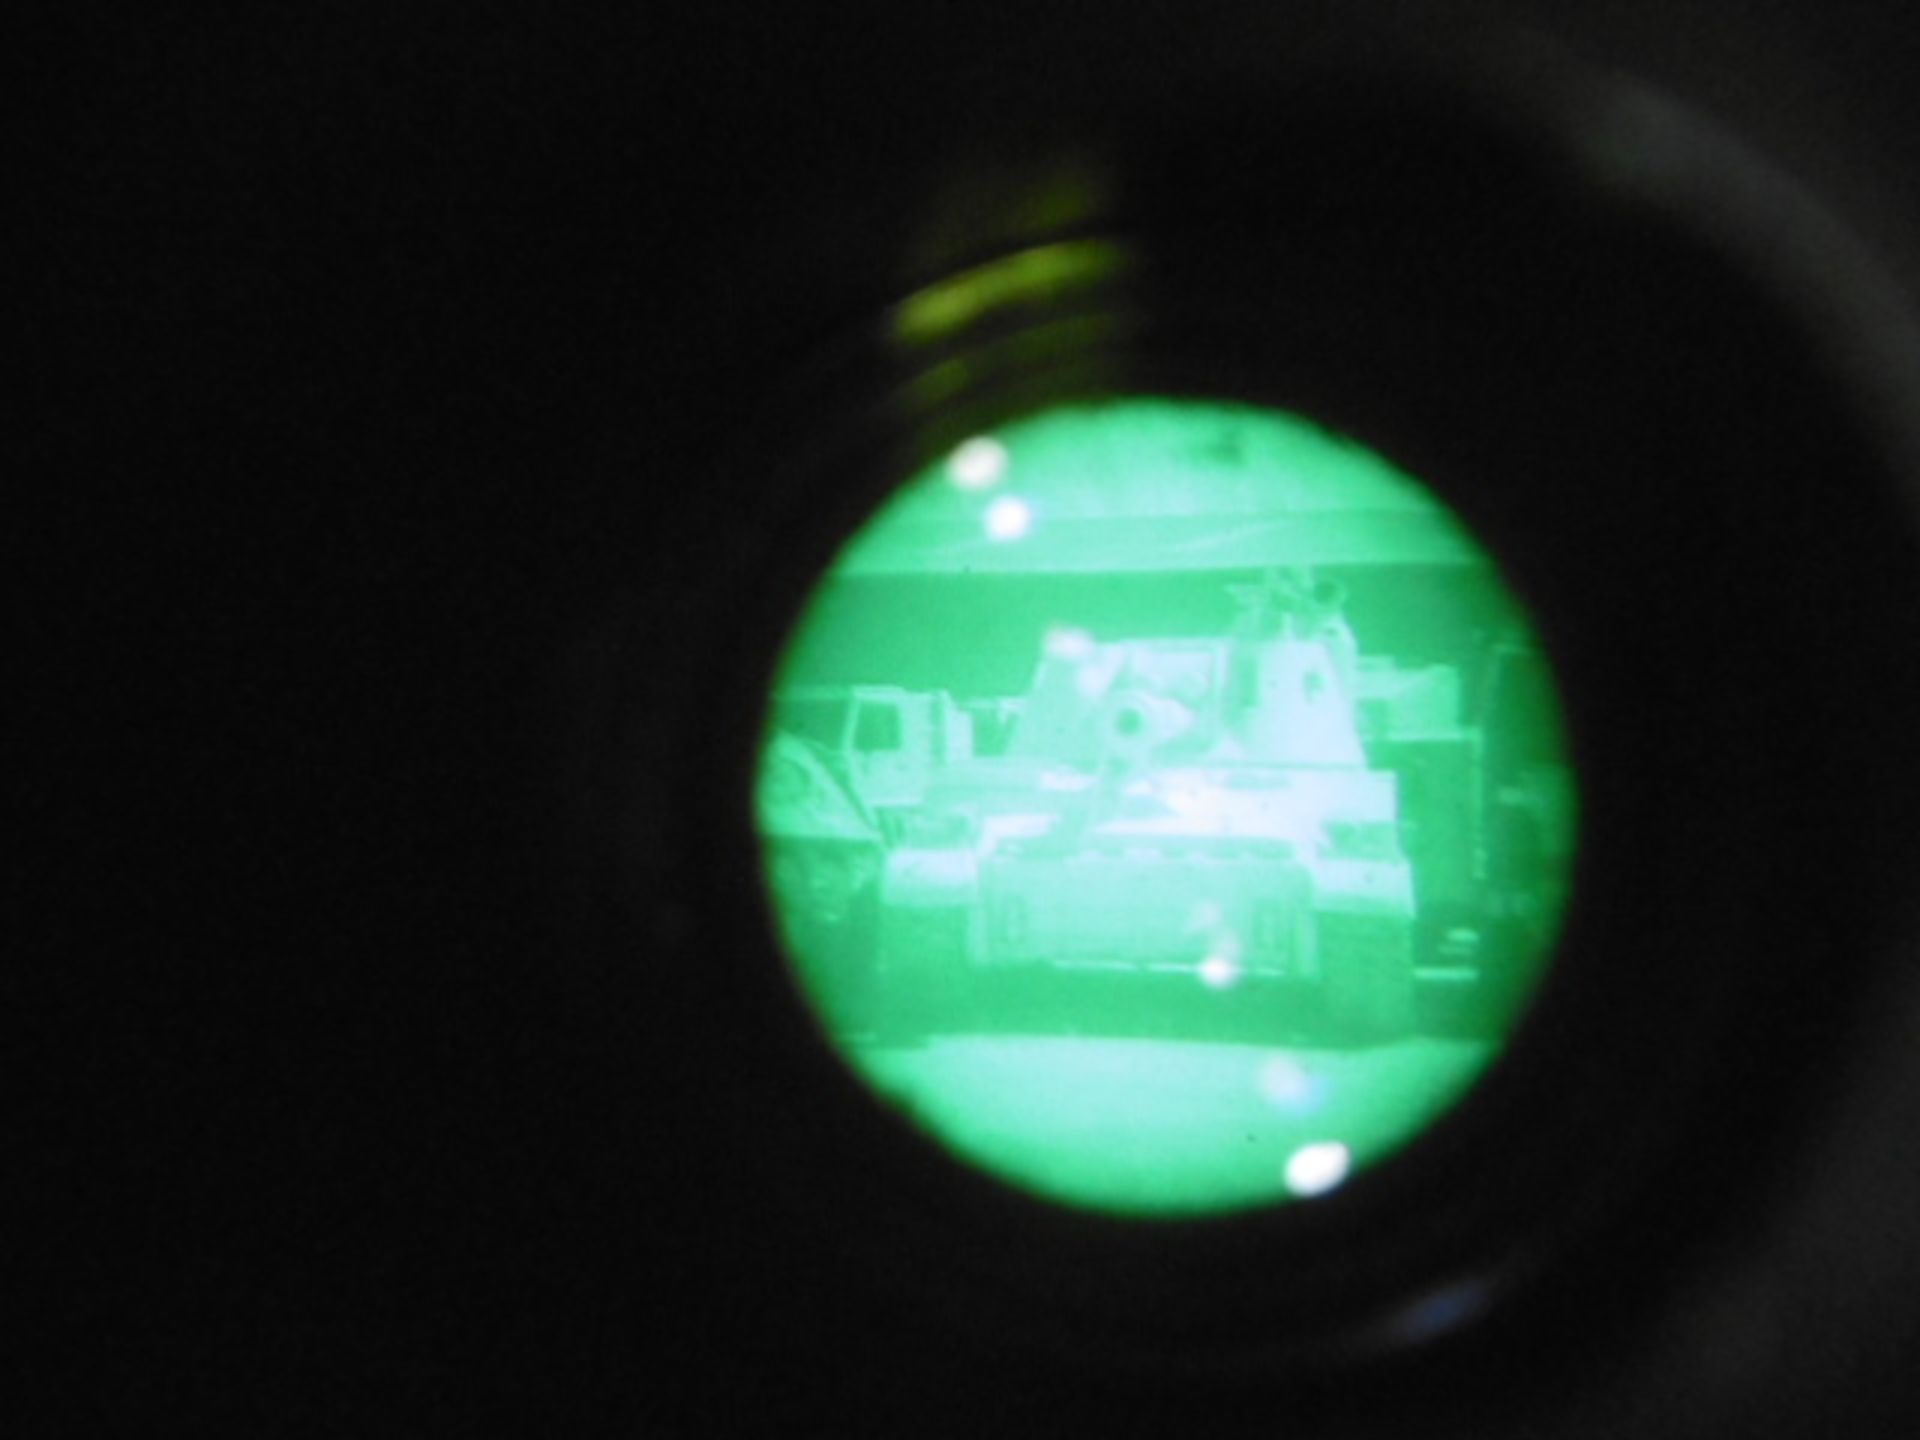 Telescope Straight Image Intensified L6A1 Scope - British Military Night Vision Pocket Scope - Image 9 of 11